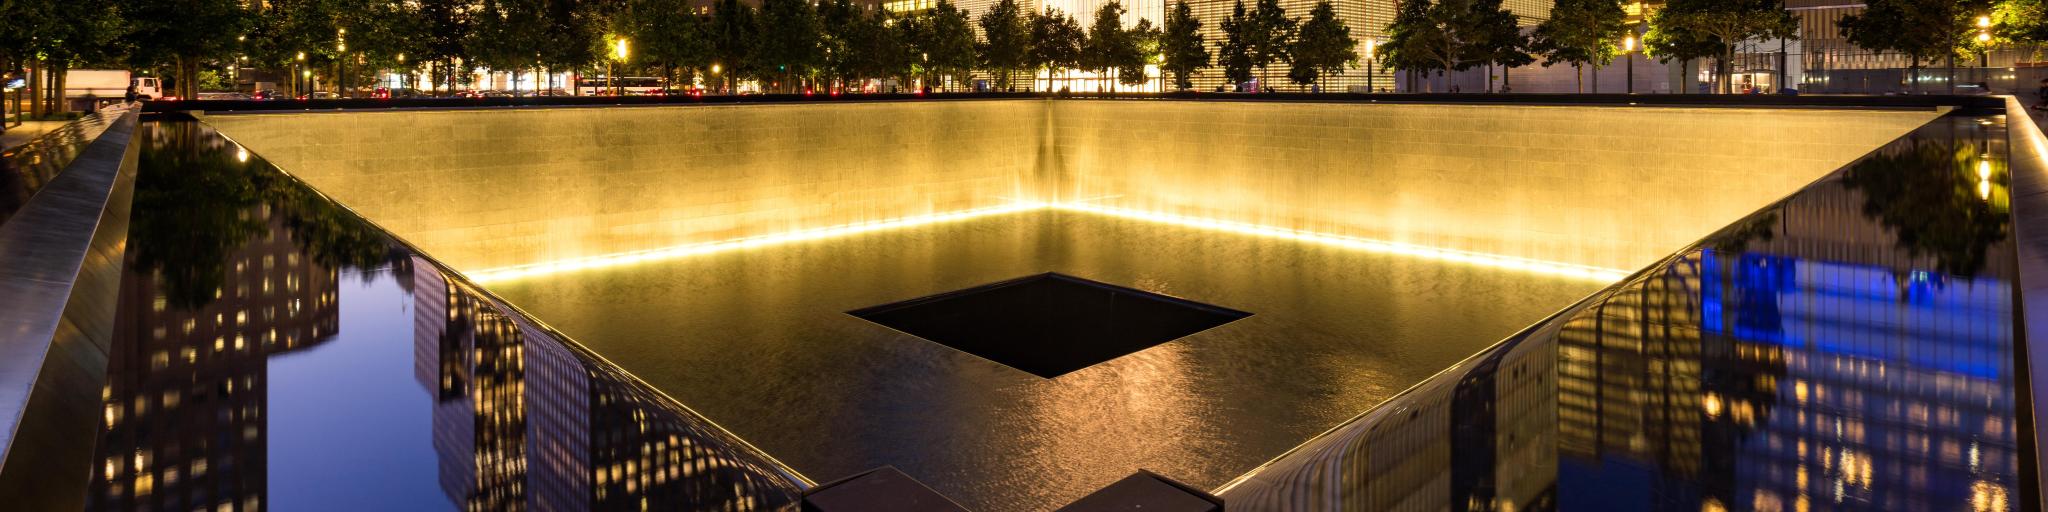 The North Reflecting Pool at the 911 Memorial at twilight